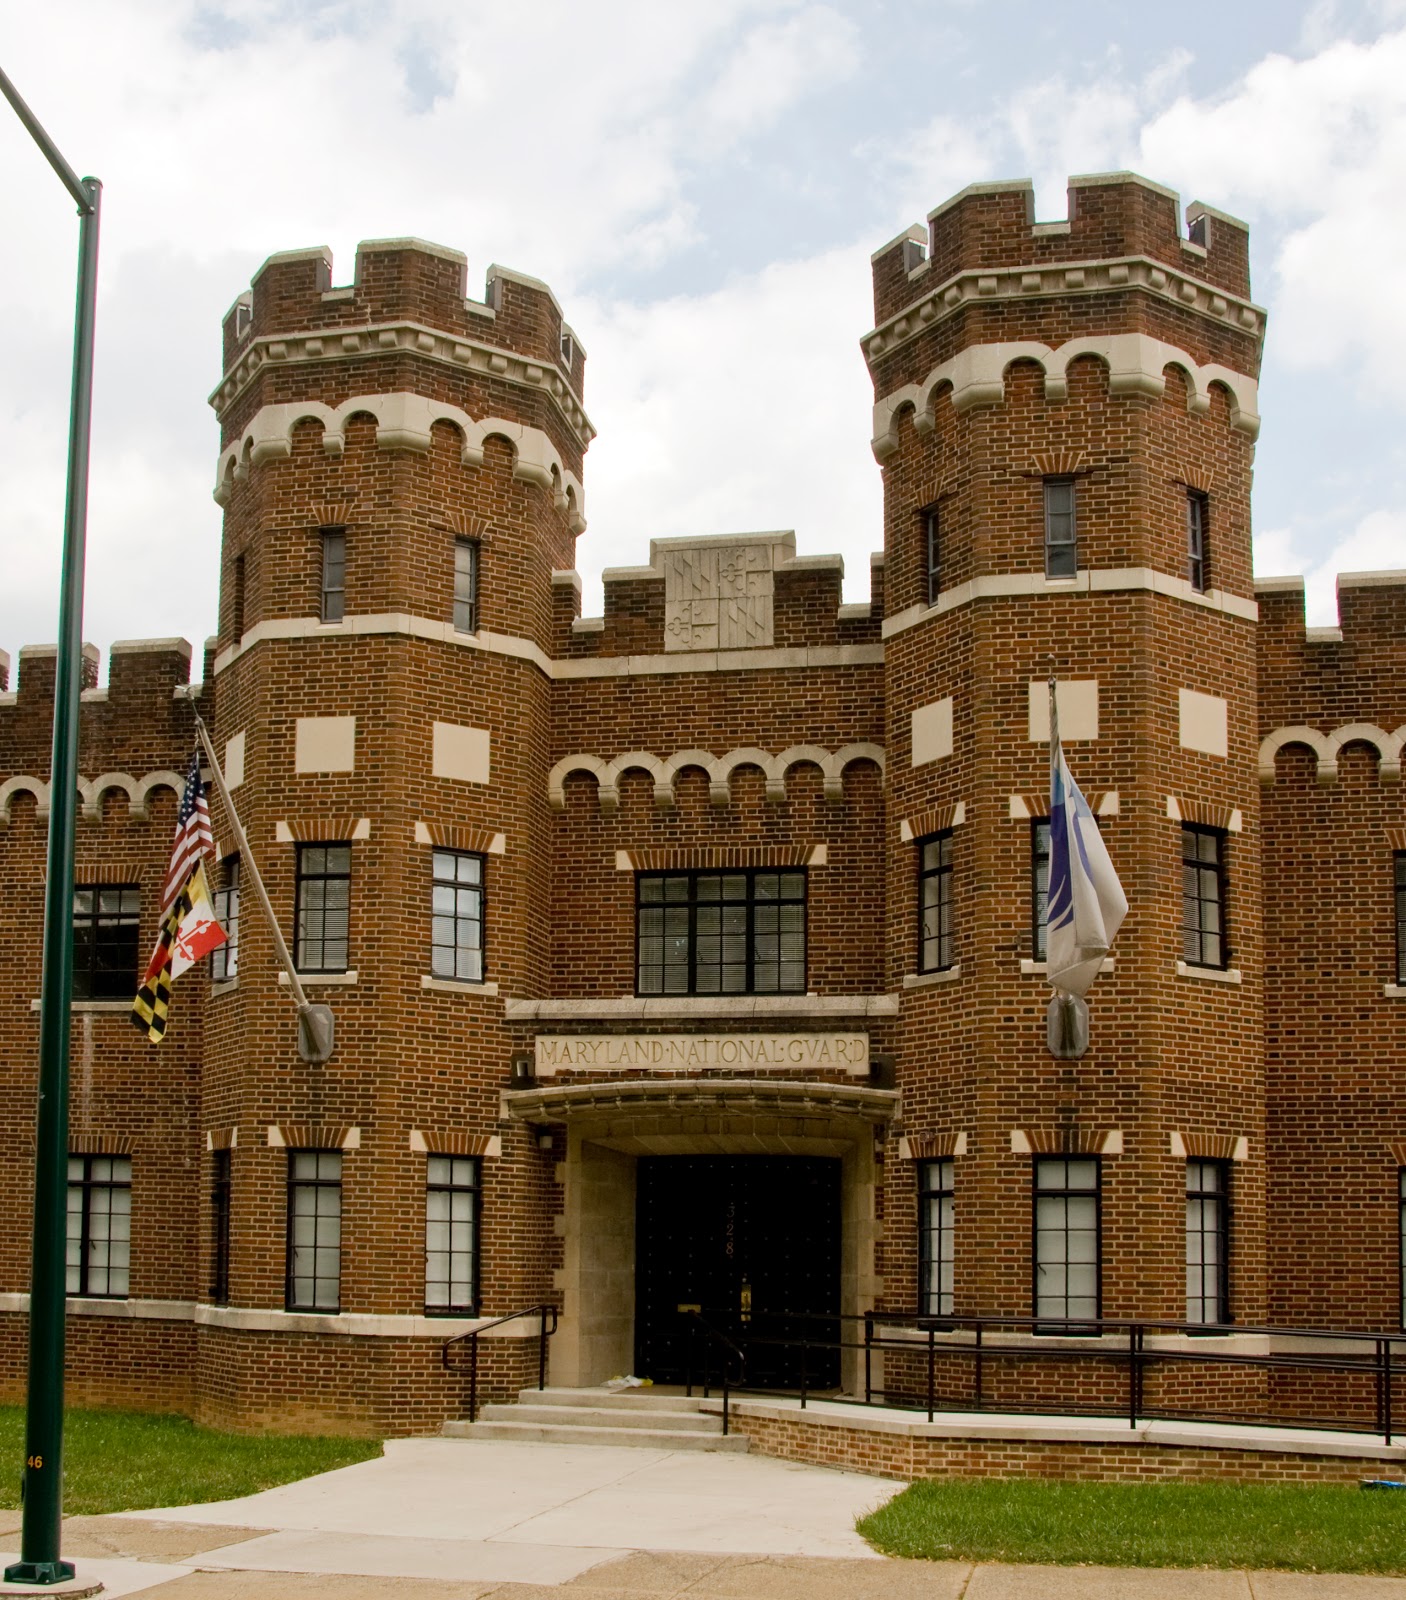 Hagerstown Armory